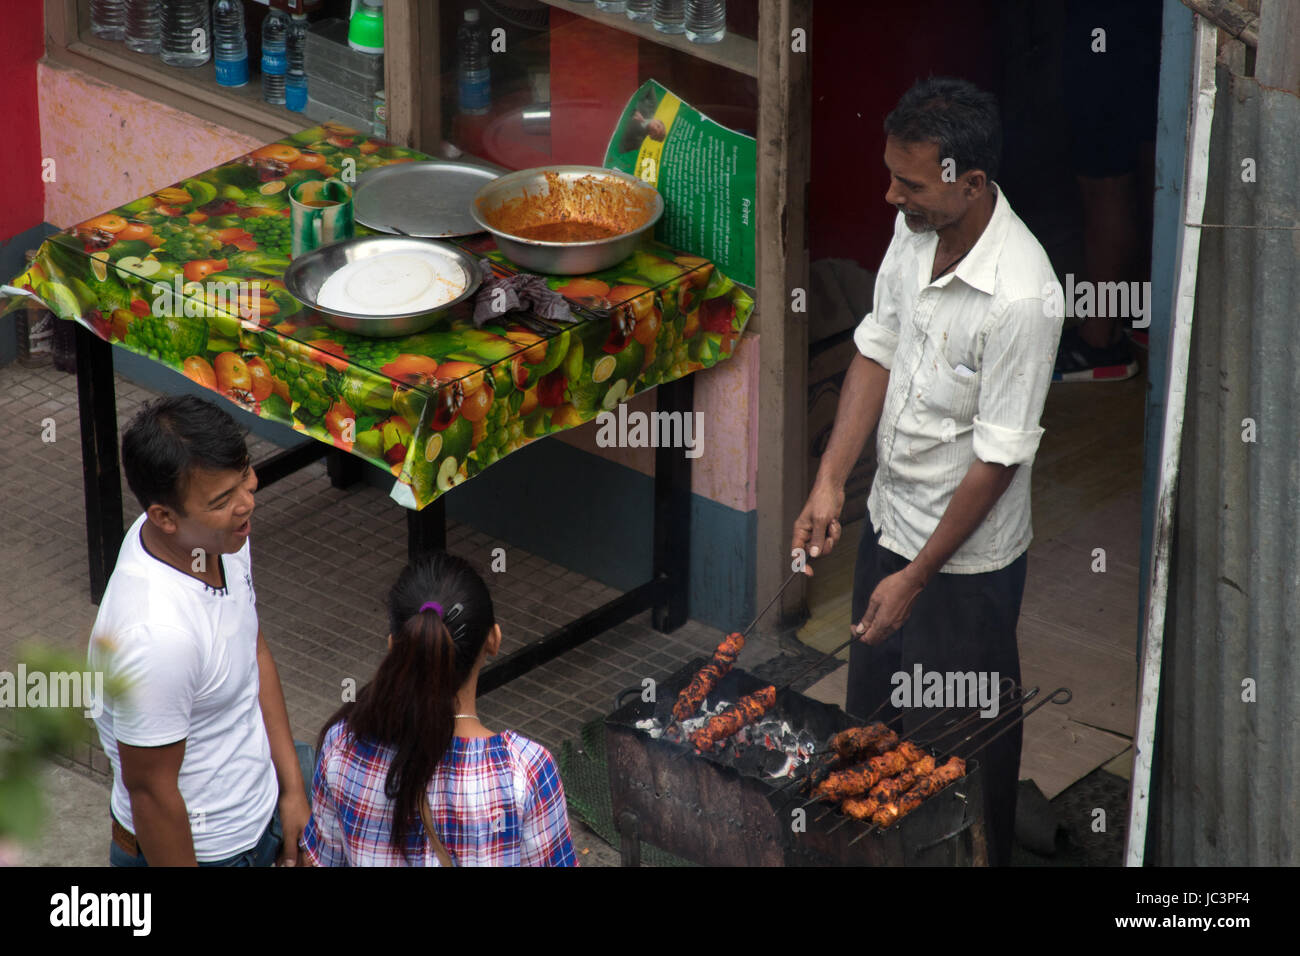 Man selling street food ouside a cafe in Kalimpong West Bengal India Stock Photo